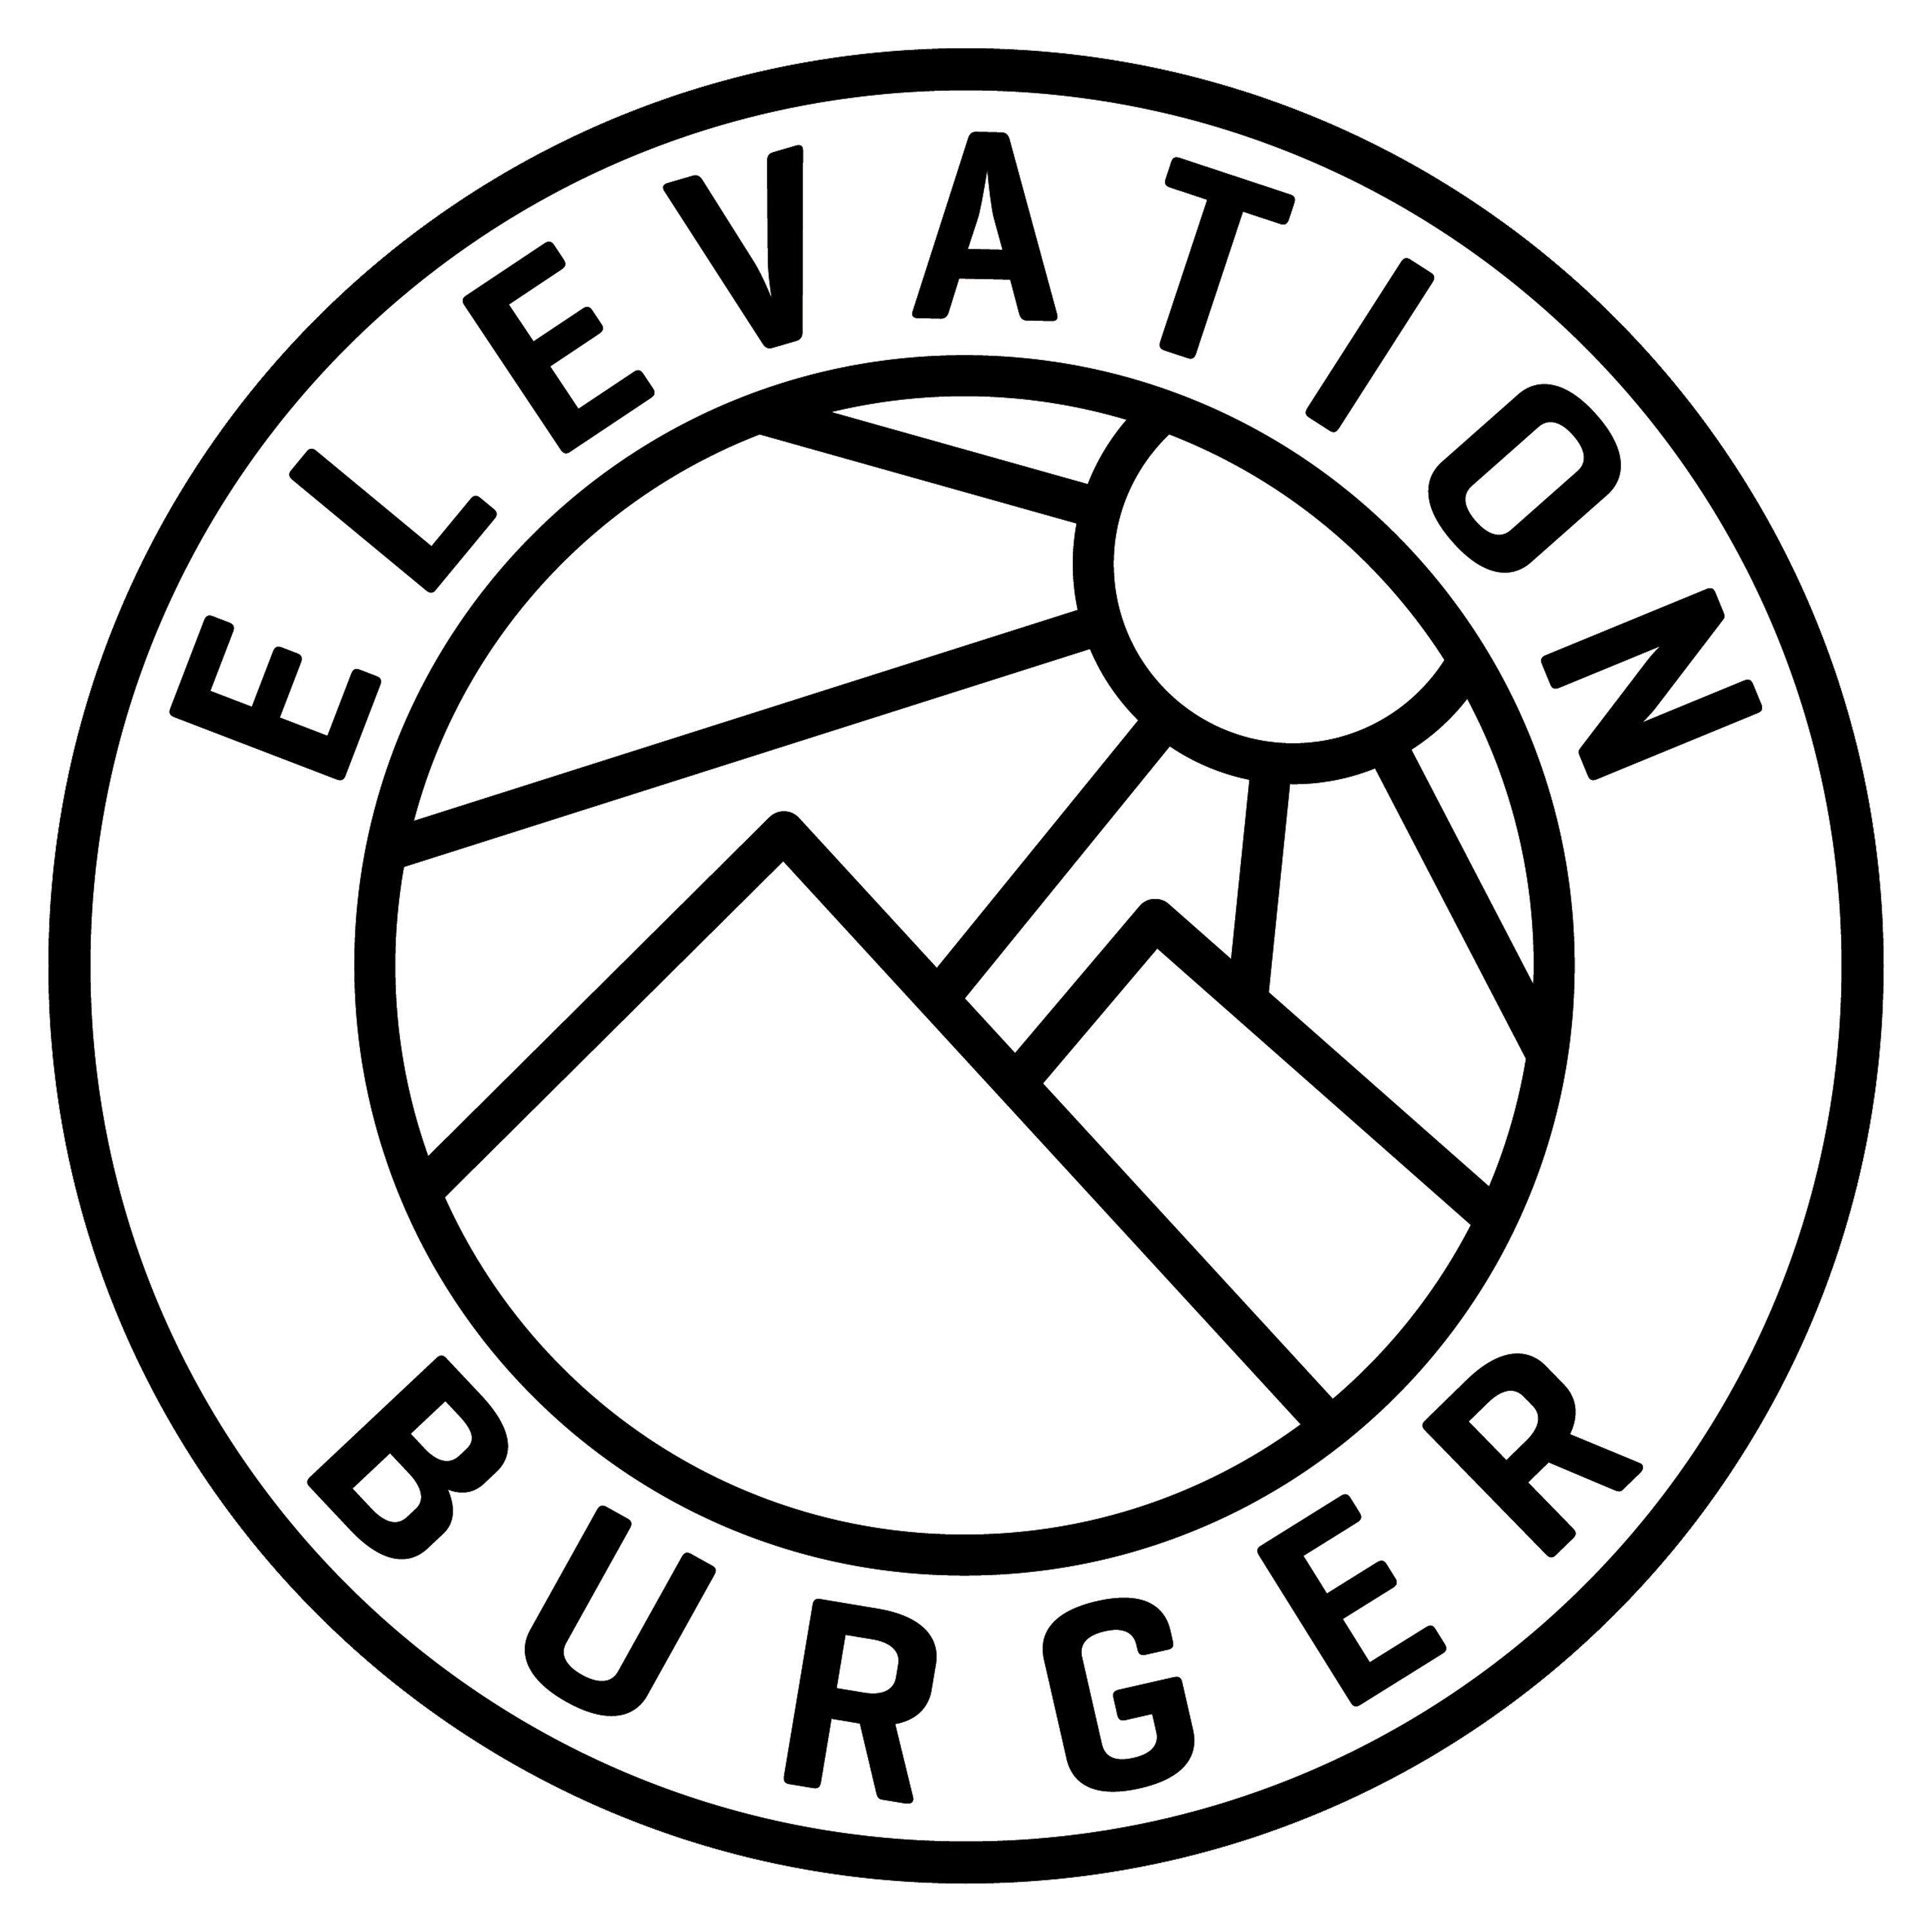 Elevation Burger Highlights Reasons They’re the Best Fast Food Restaurant